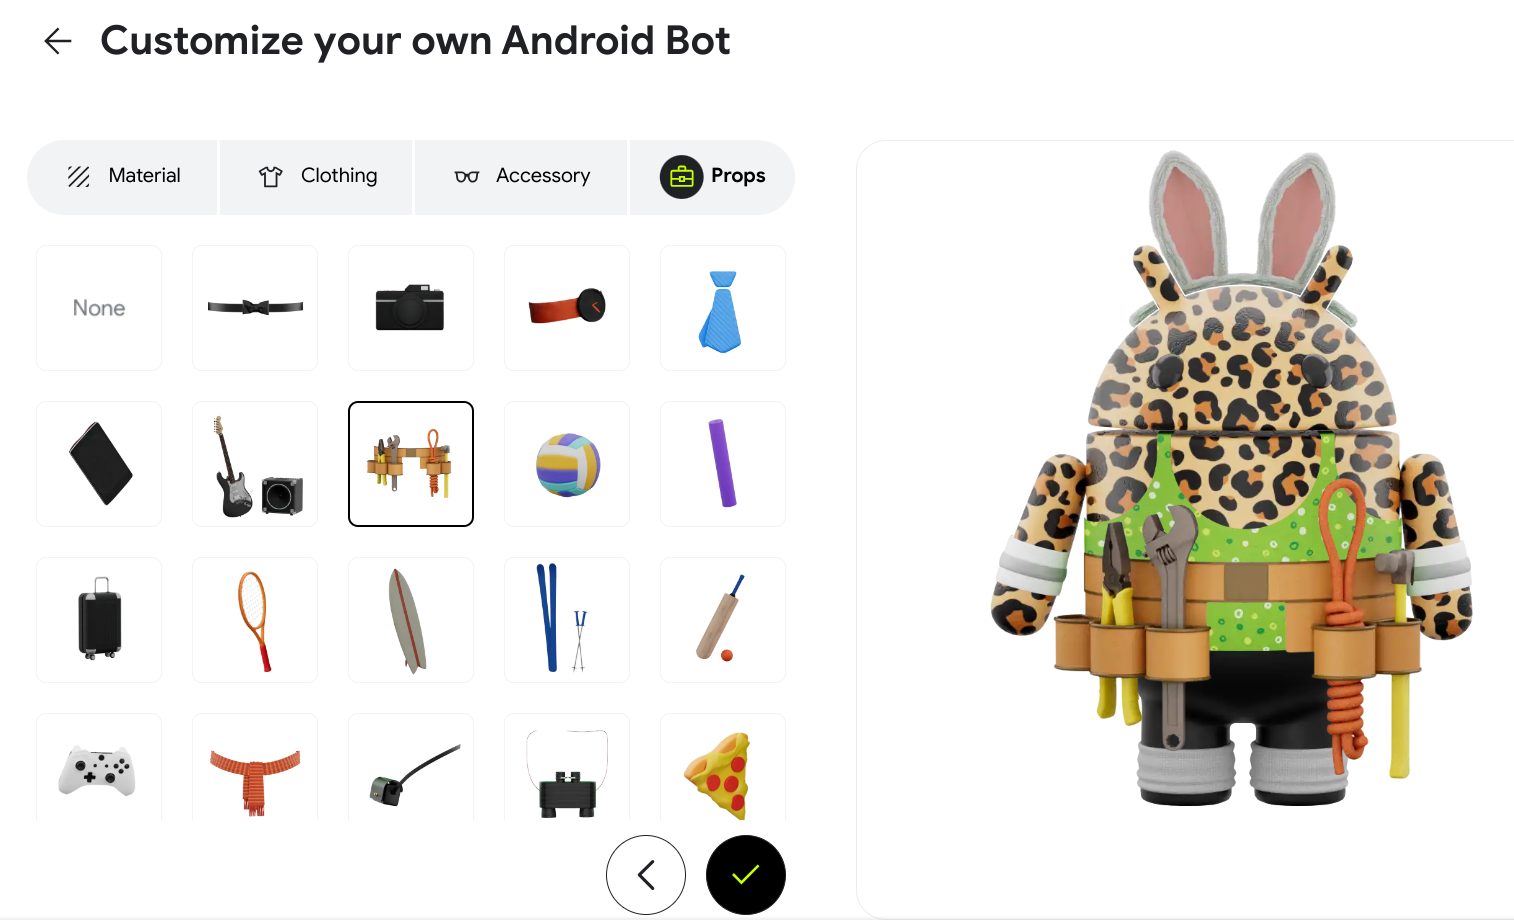 The Android mascot wearing a toolbelt